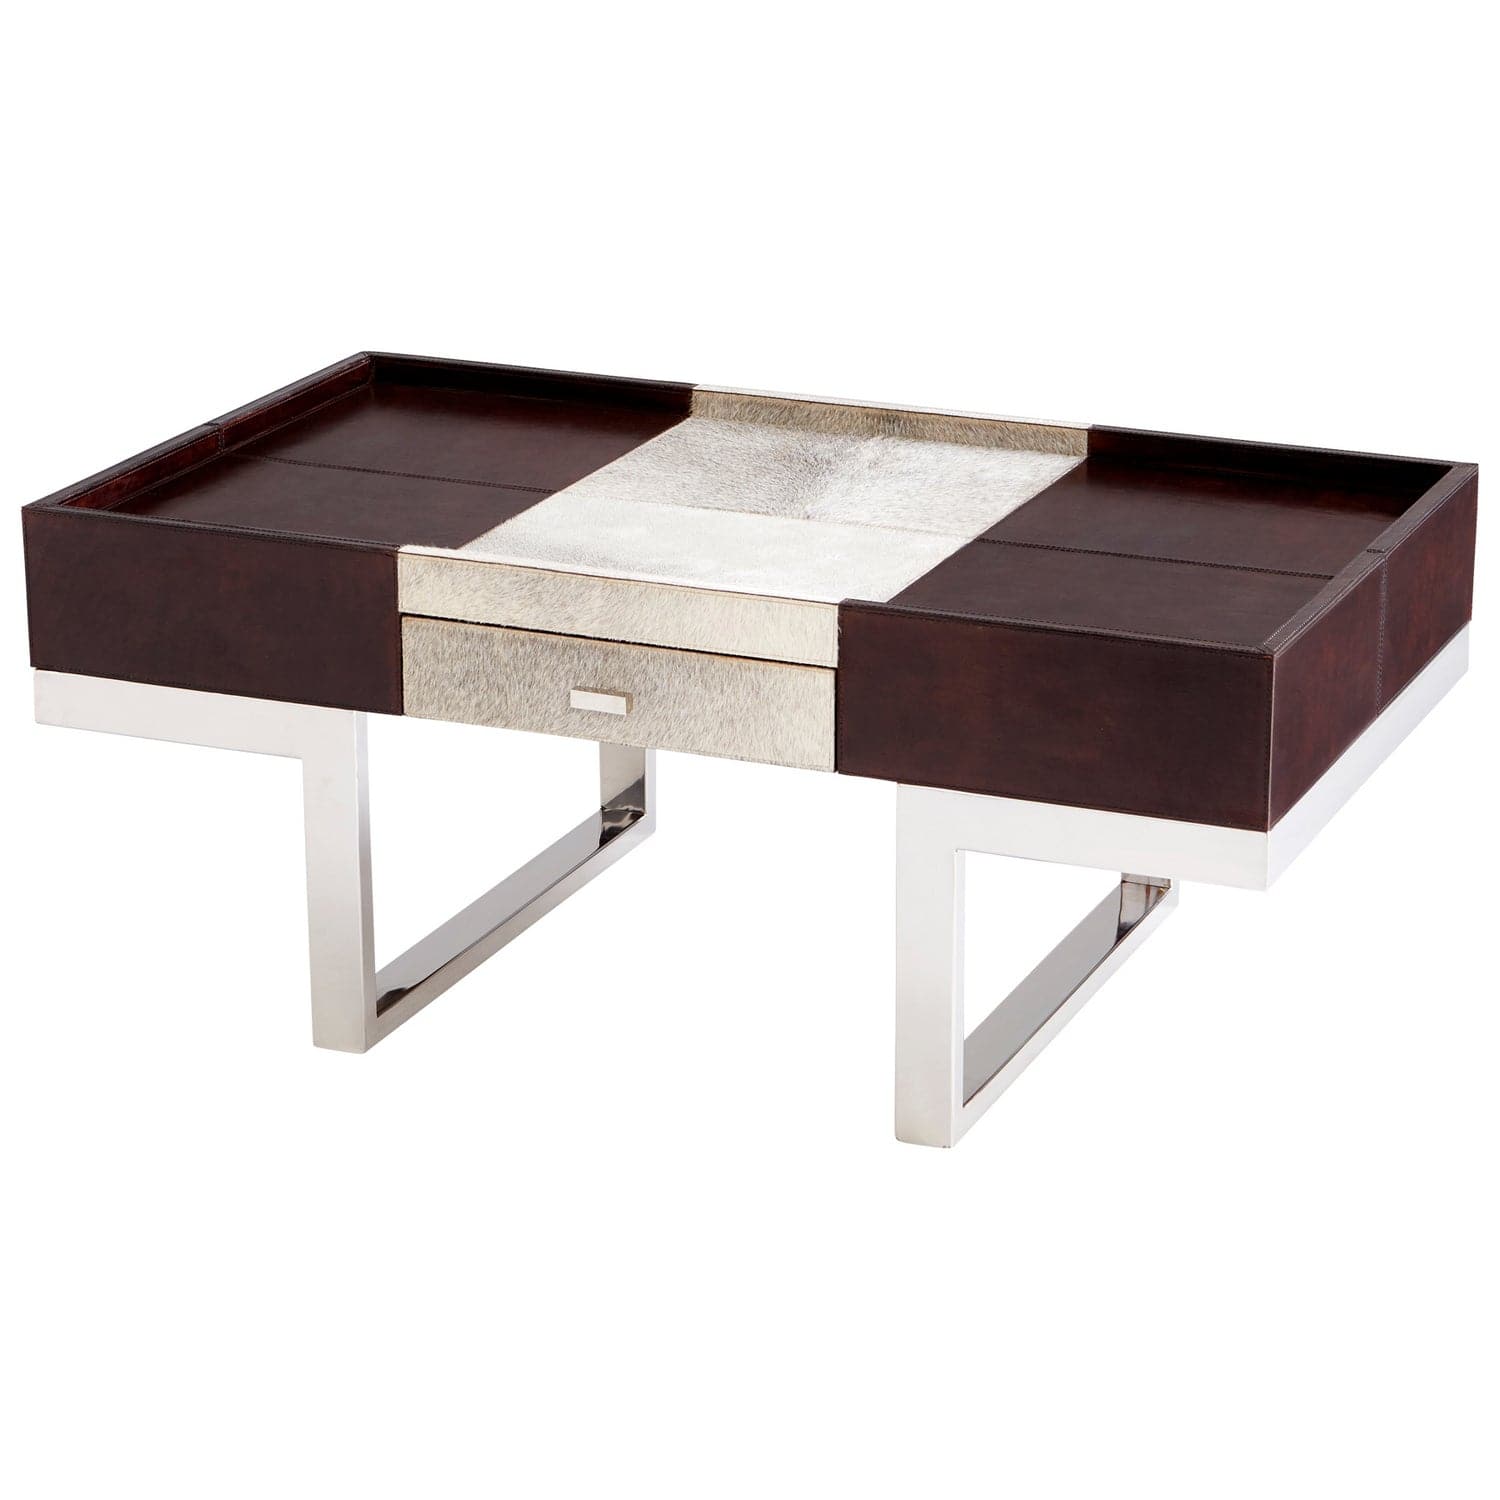 Cyan - 09754 - Coffee Table - Stainless Steel And Brown